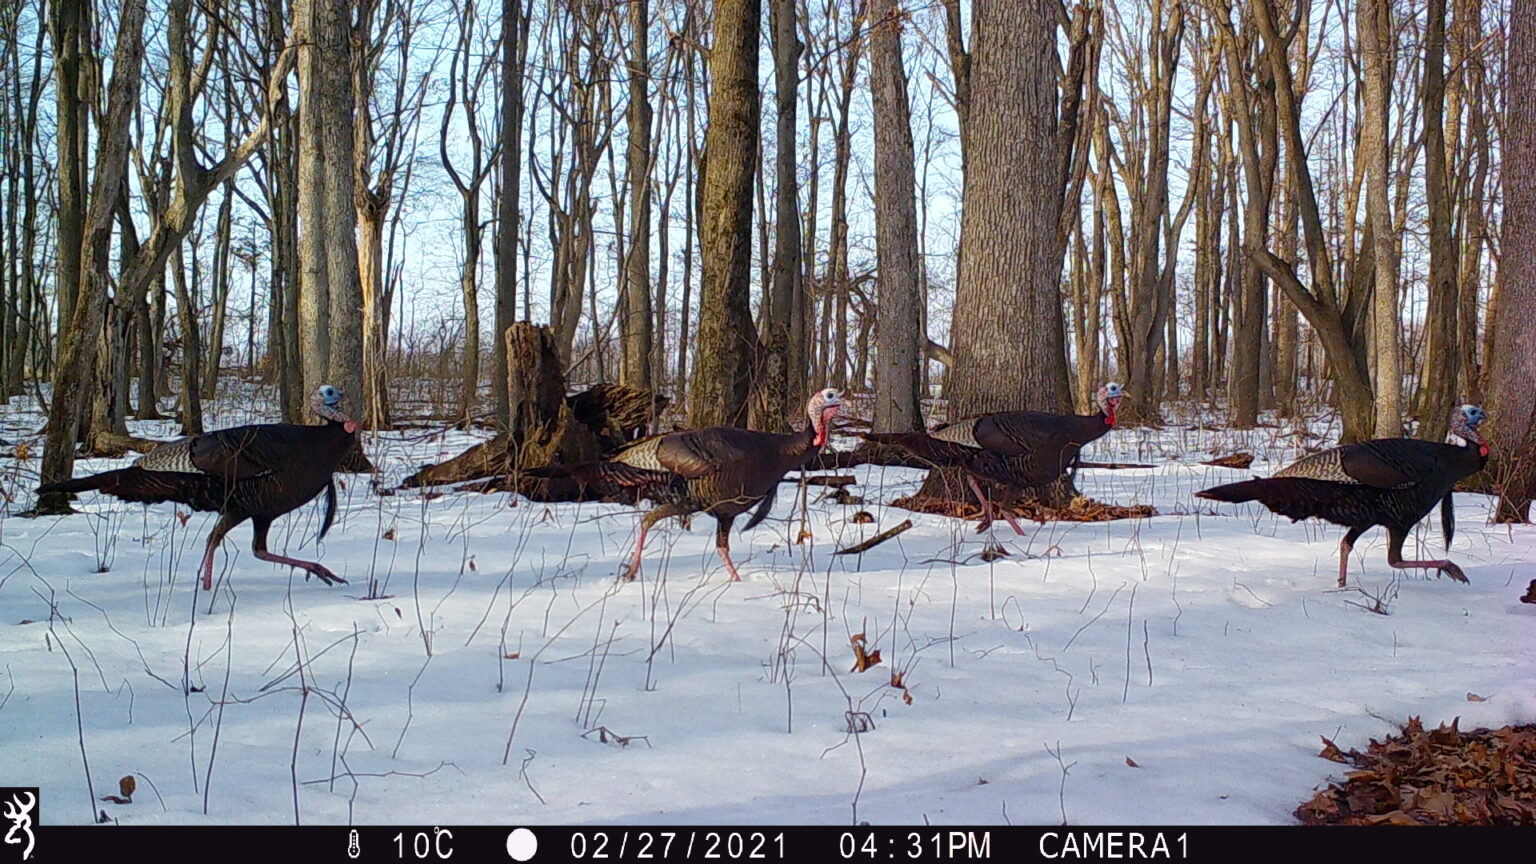 Turkeys passing through the forest